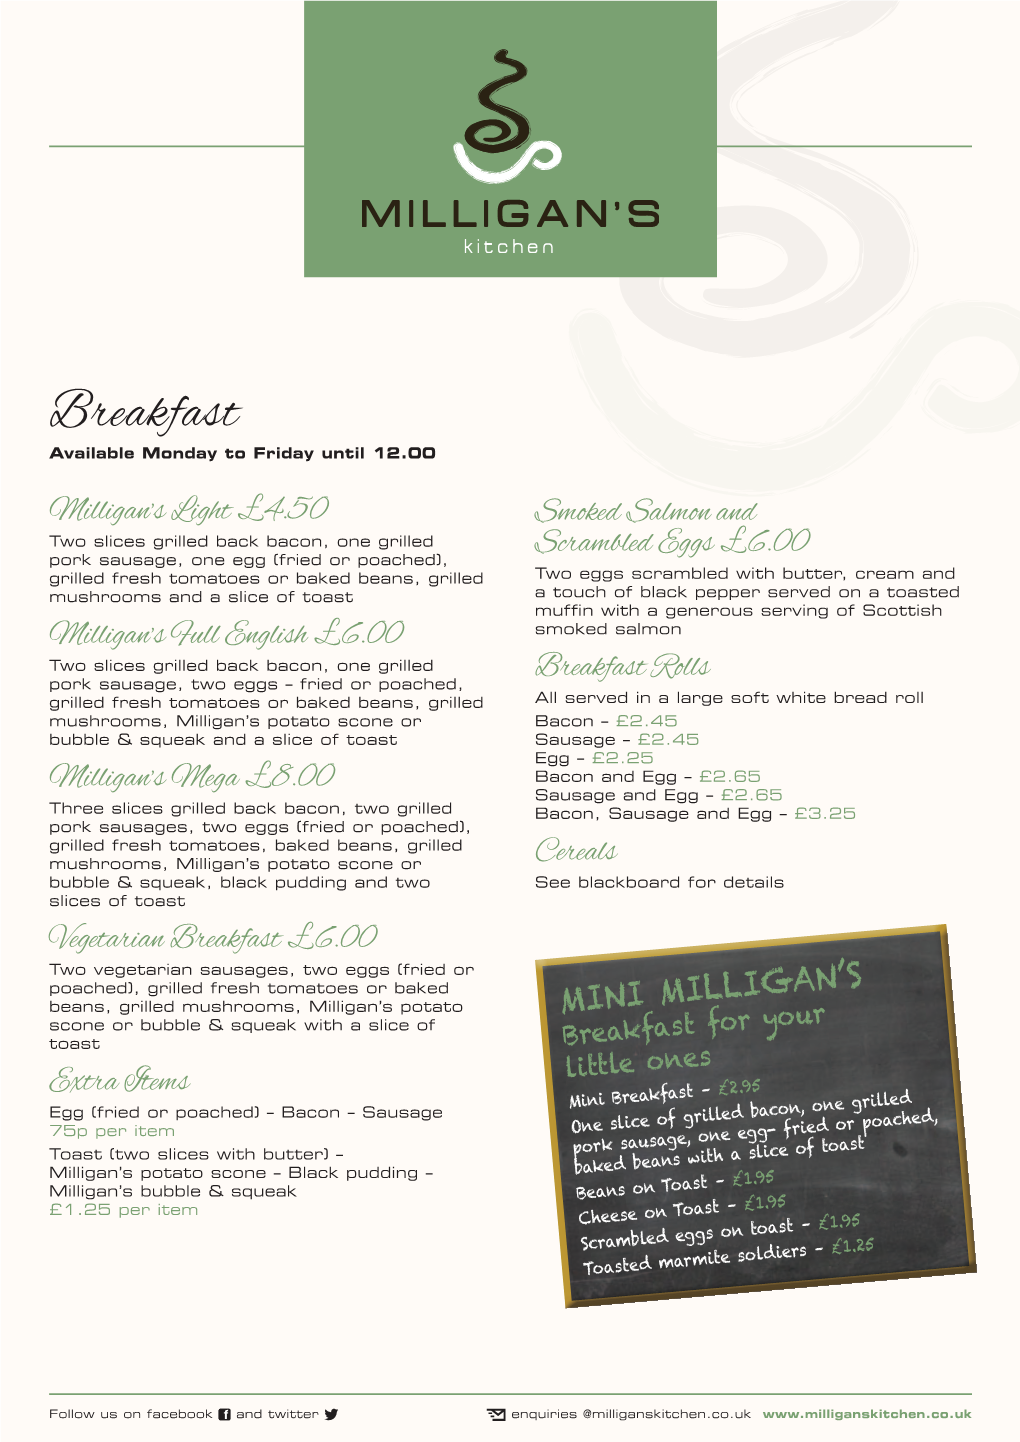 Breakfast Available Monday to Friday Until 12.00